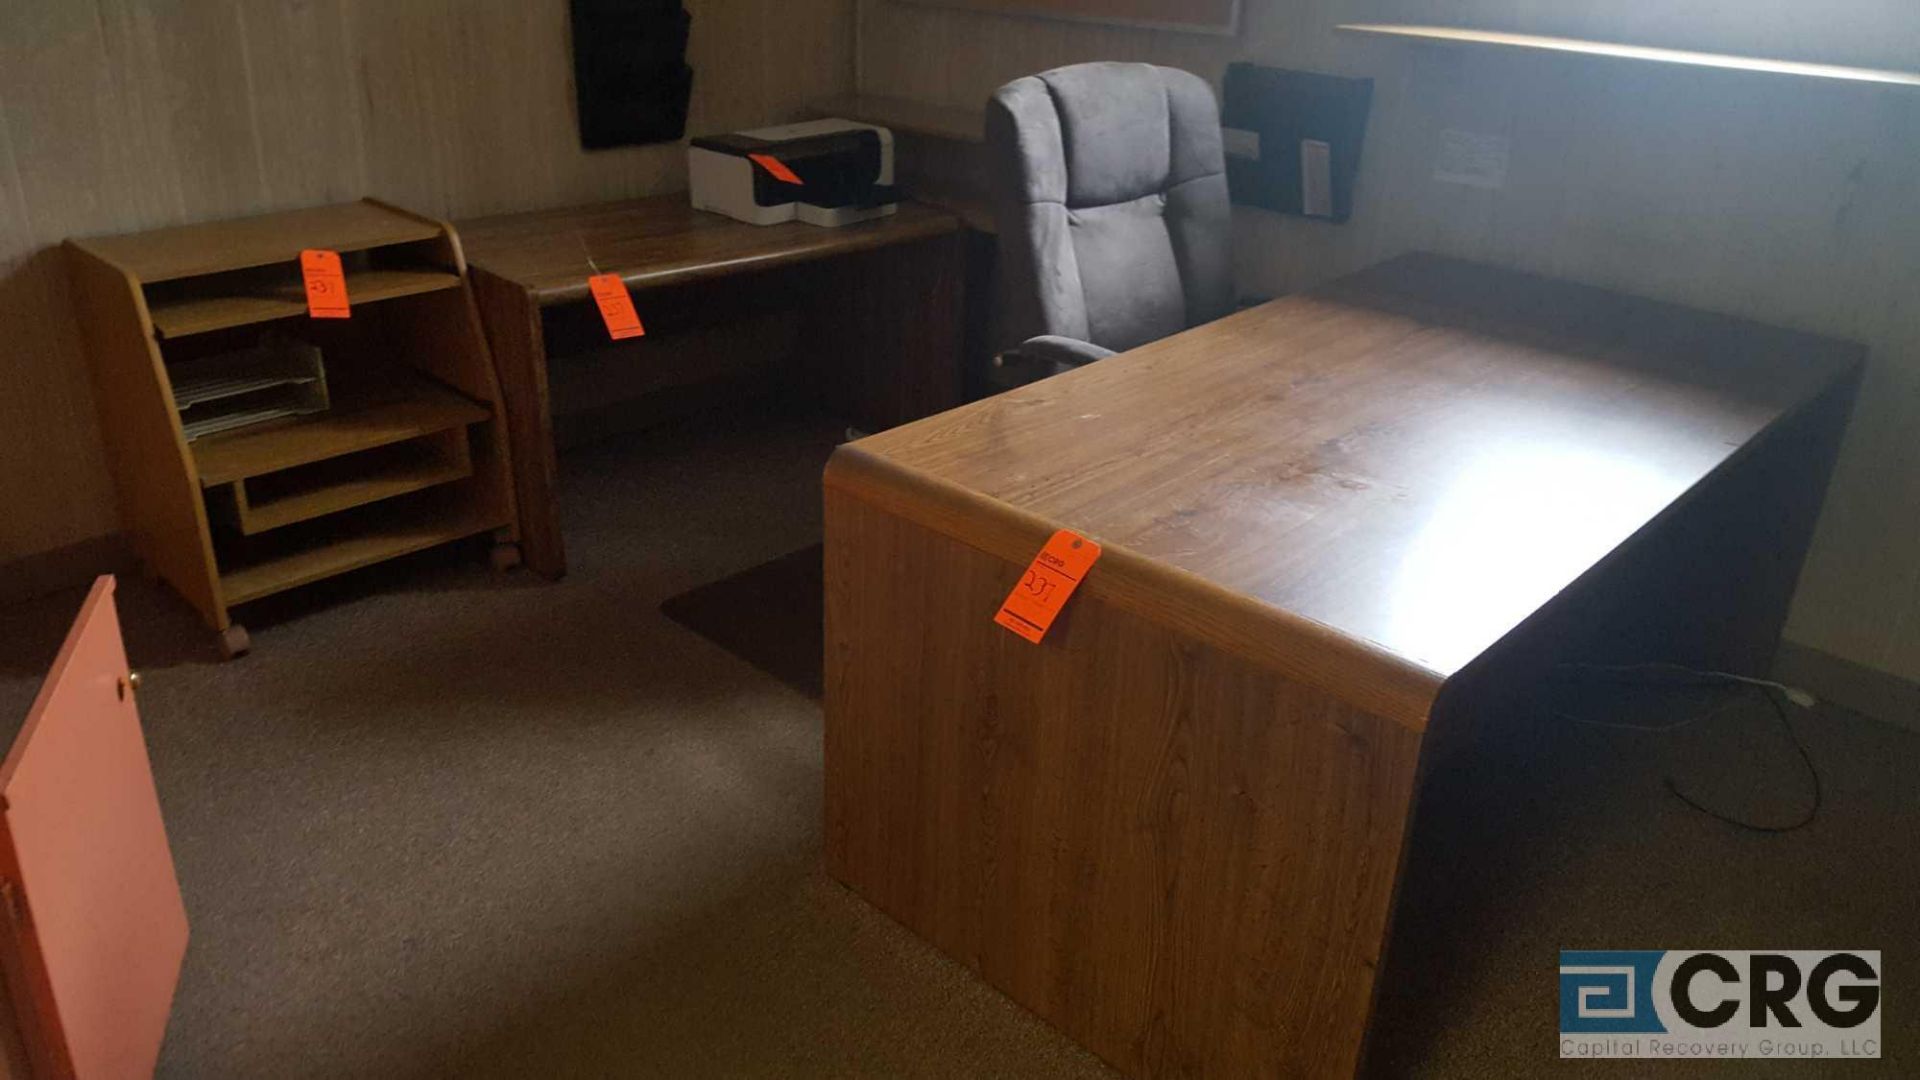 Lot of assorted office furnishings etc, including desks, chairs, file cabinets, bookcases etc, - Image 11 of 15